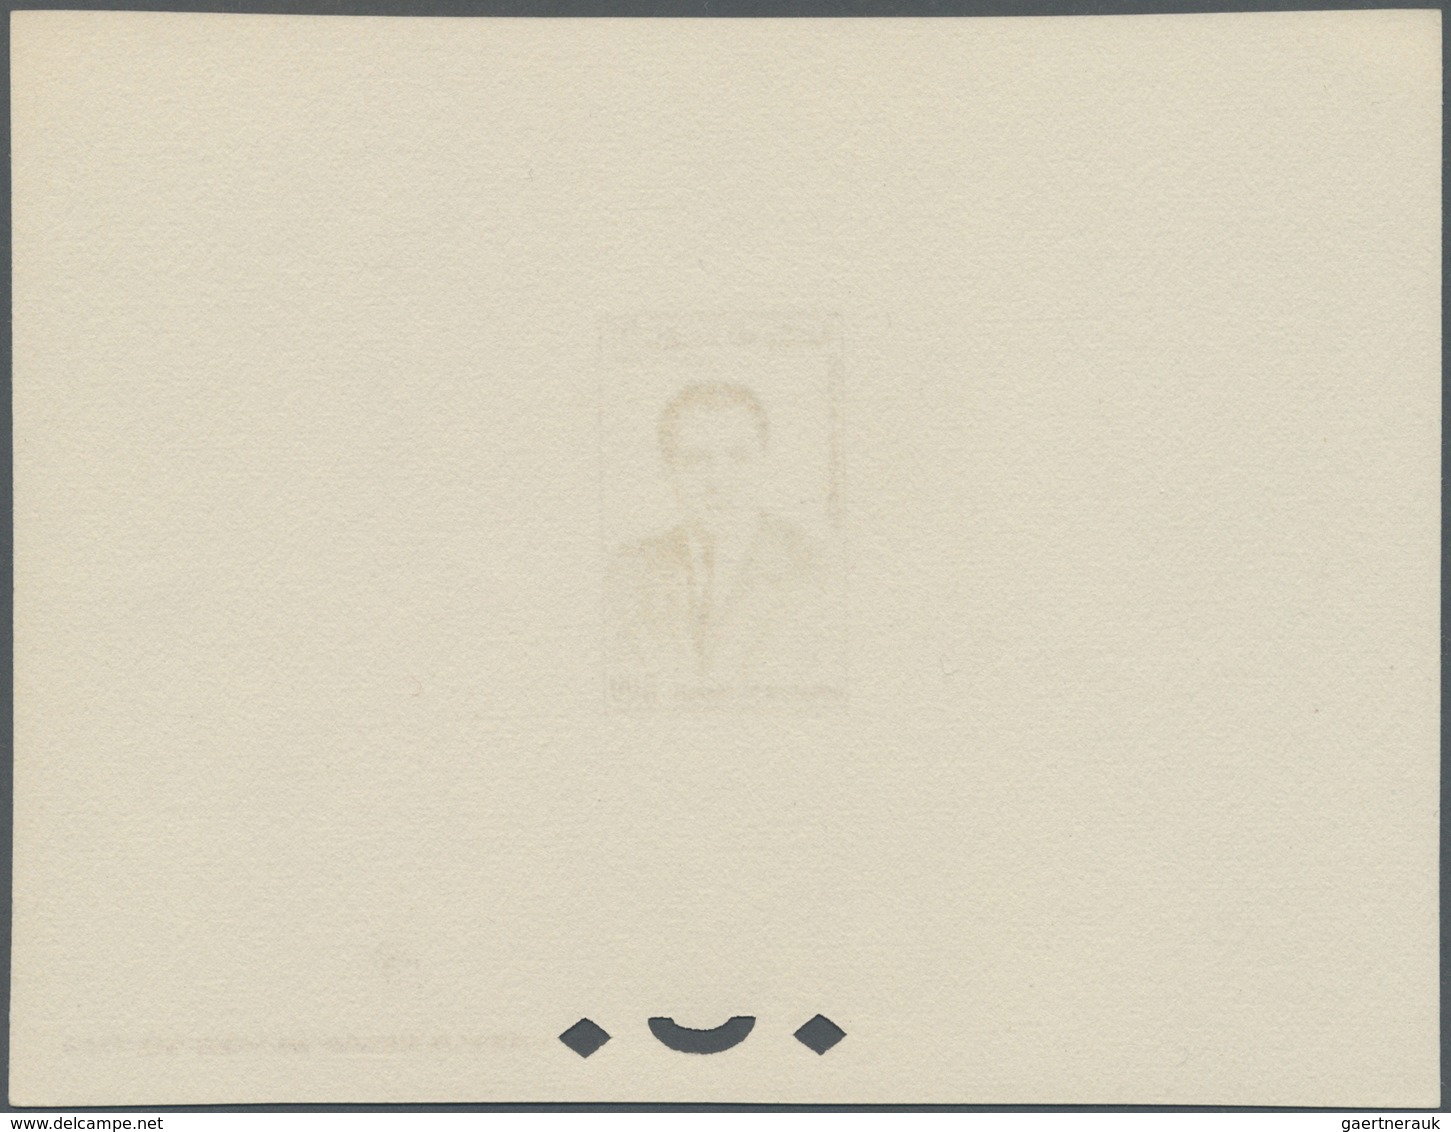 (*) Marokko: 1962, King Hassan II, 0.01dh. to 5.00dh., 13 values (issued on 14 Jun + 4 Oct 1962) as epre